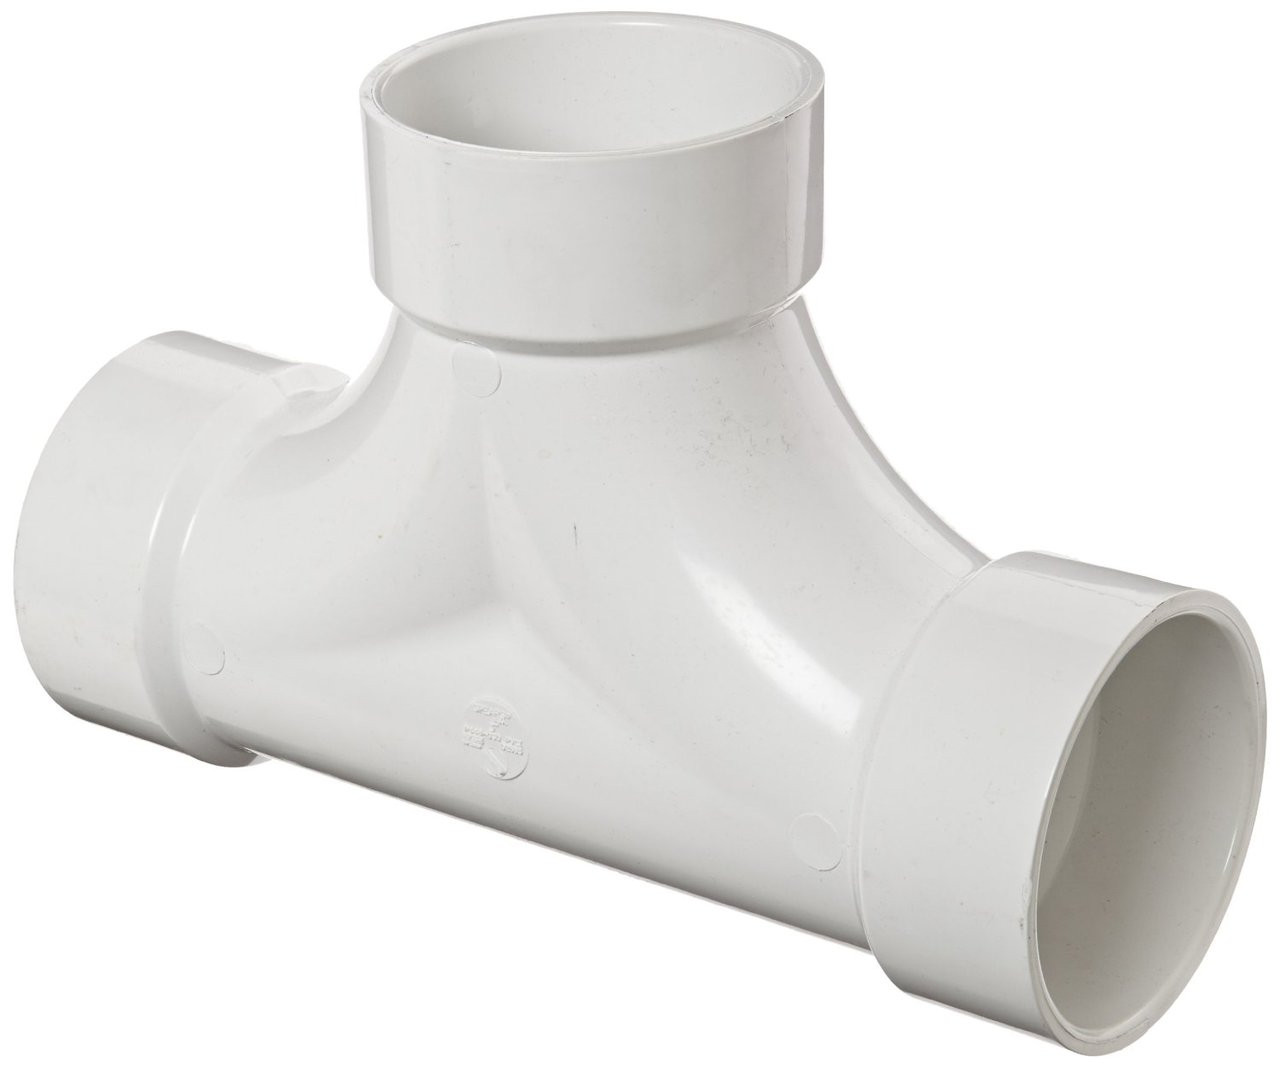 3 X 3 X 3 Pvc Dwv 2 Way Cleanout Tee S X S X S The Drainage Products Store